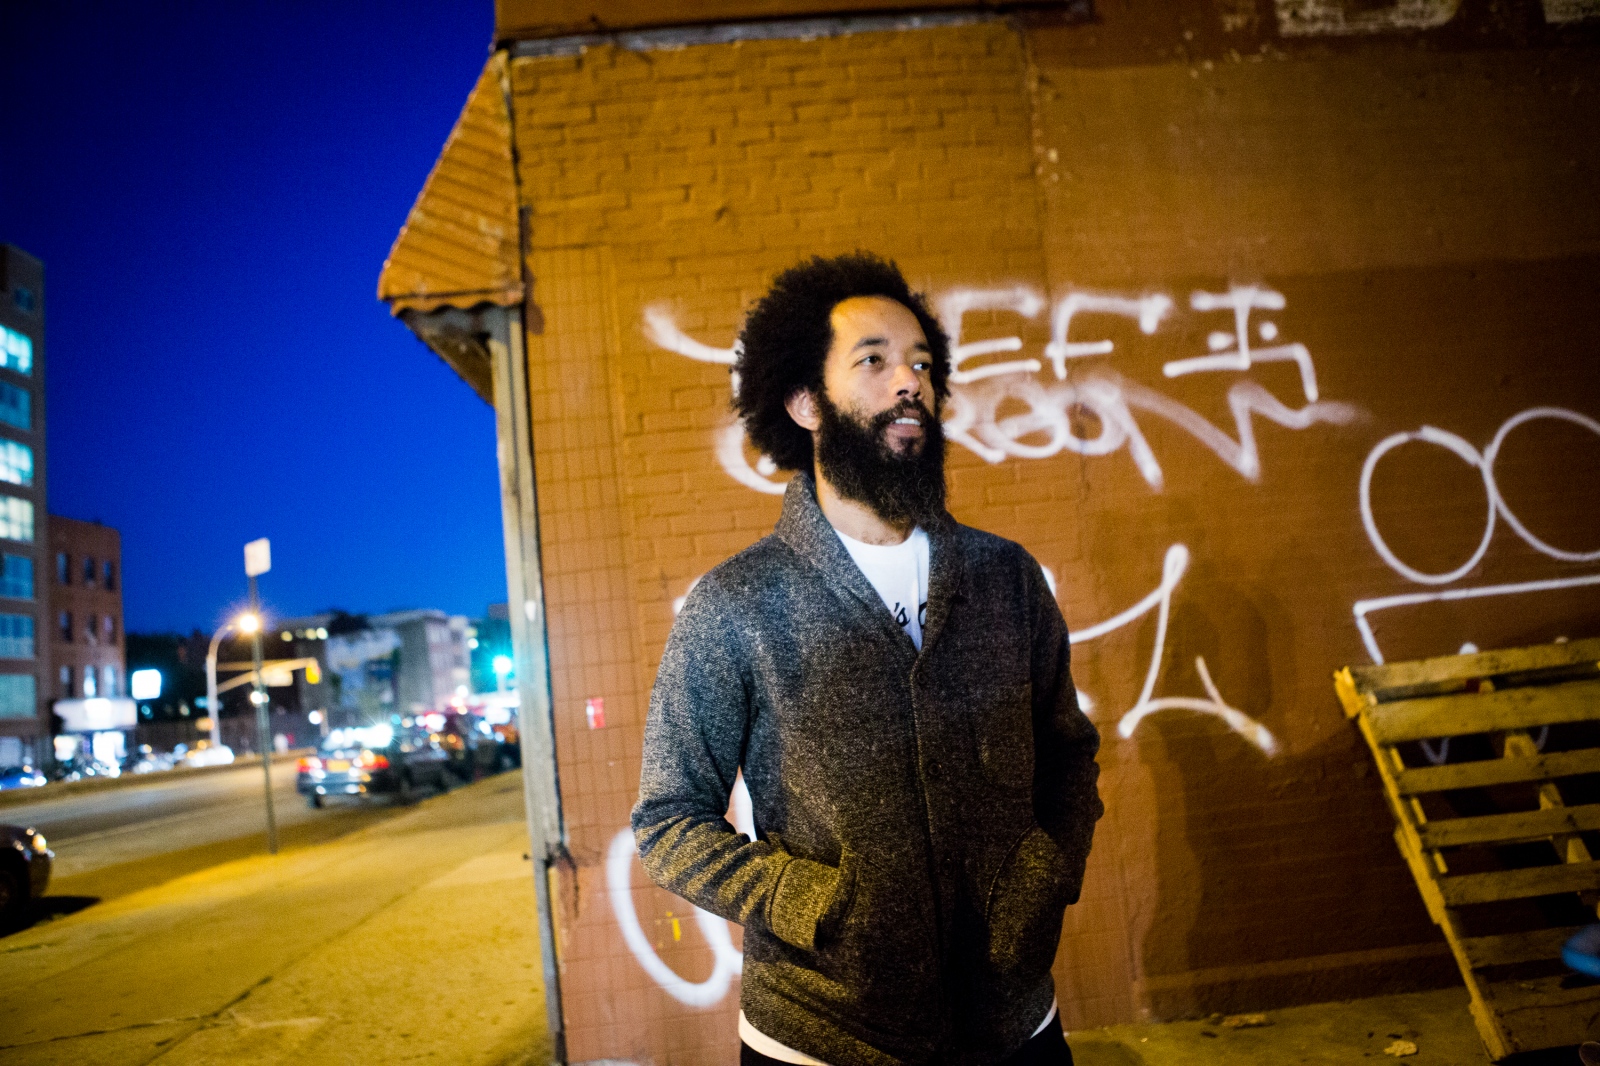 On the Spot, NYC -  Wyatt Cenac, actor, writer, comedian and former...